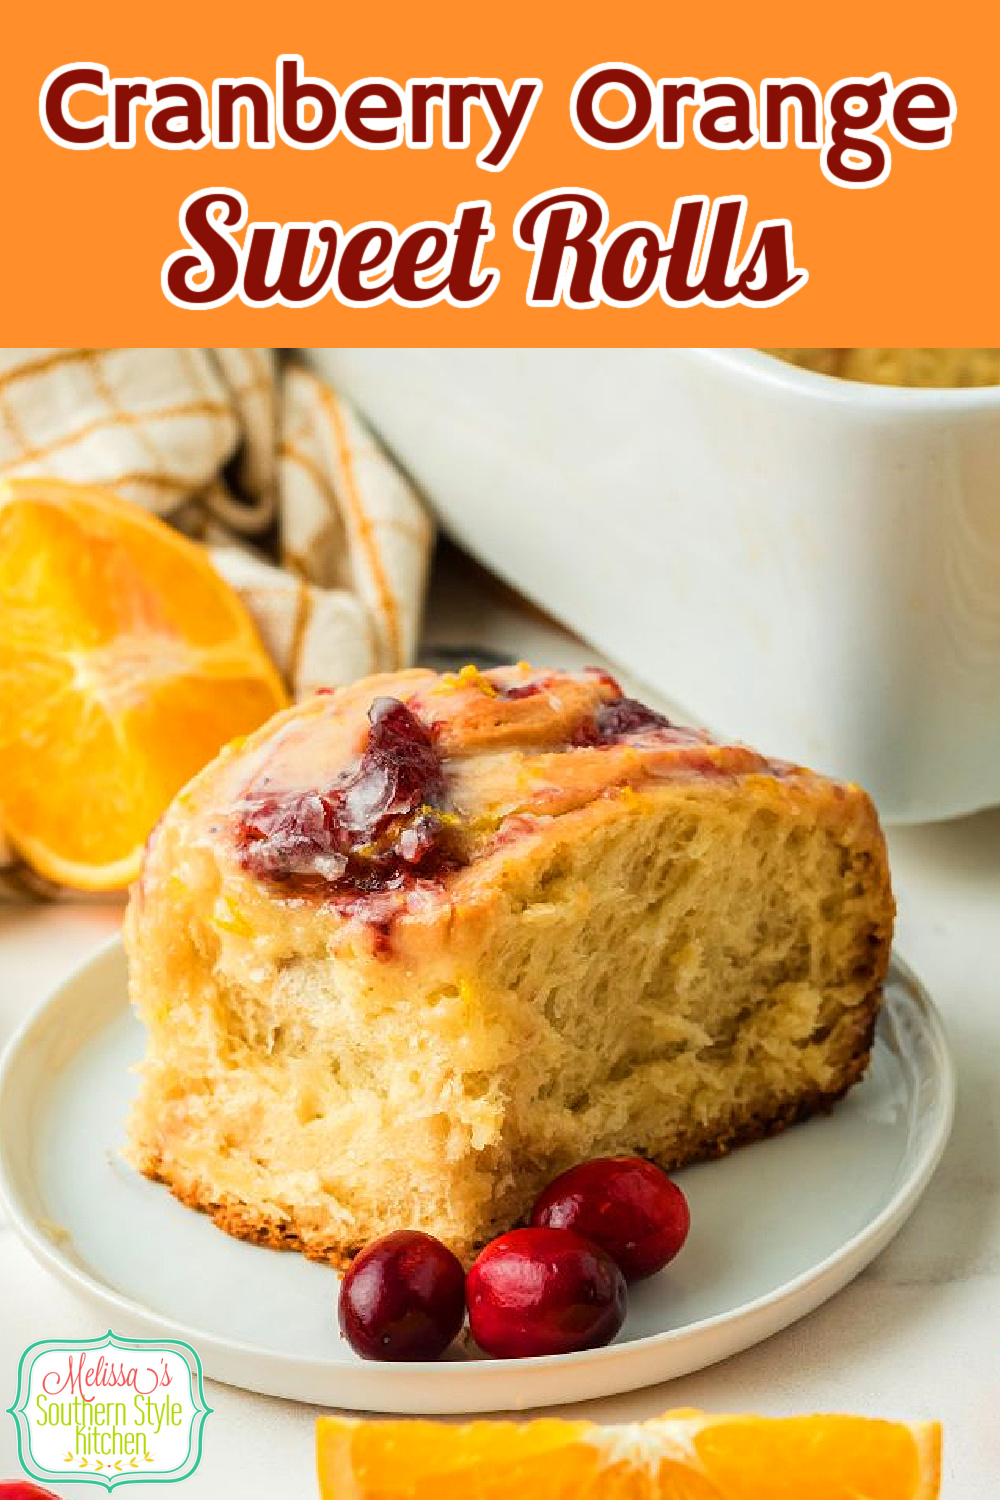 These bakery style Cranberry Orange Sweet Rolls will make a mouthwatering addition to your special occasion sweet treats menu #cranberries #cranberryorangesweetrolls #cranberryrolls #cinnamonrolls #cranberryrolls #orangecinnamonrollsv via @melissasssk